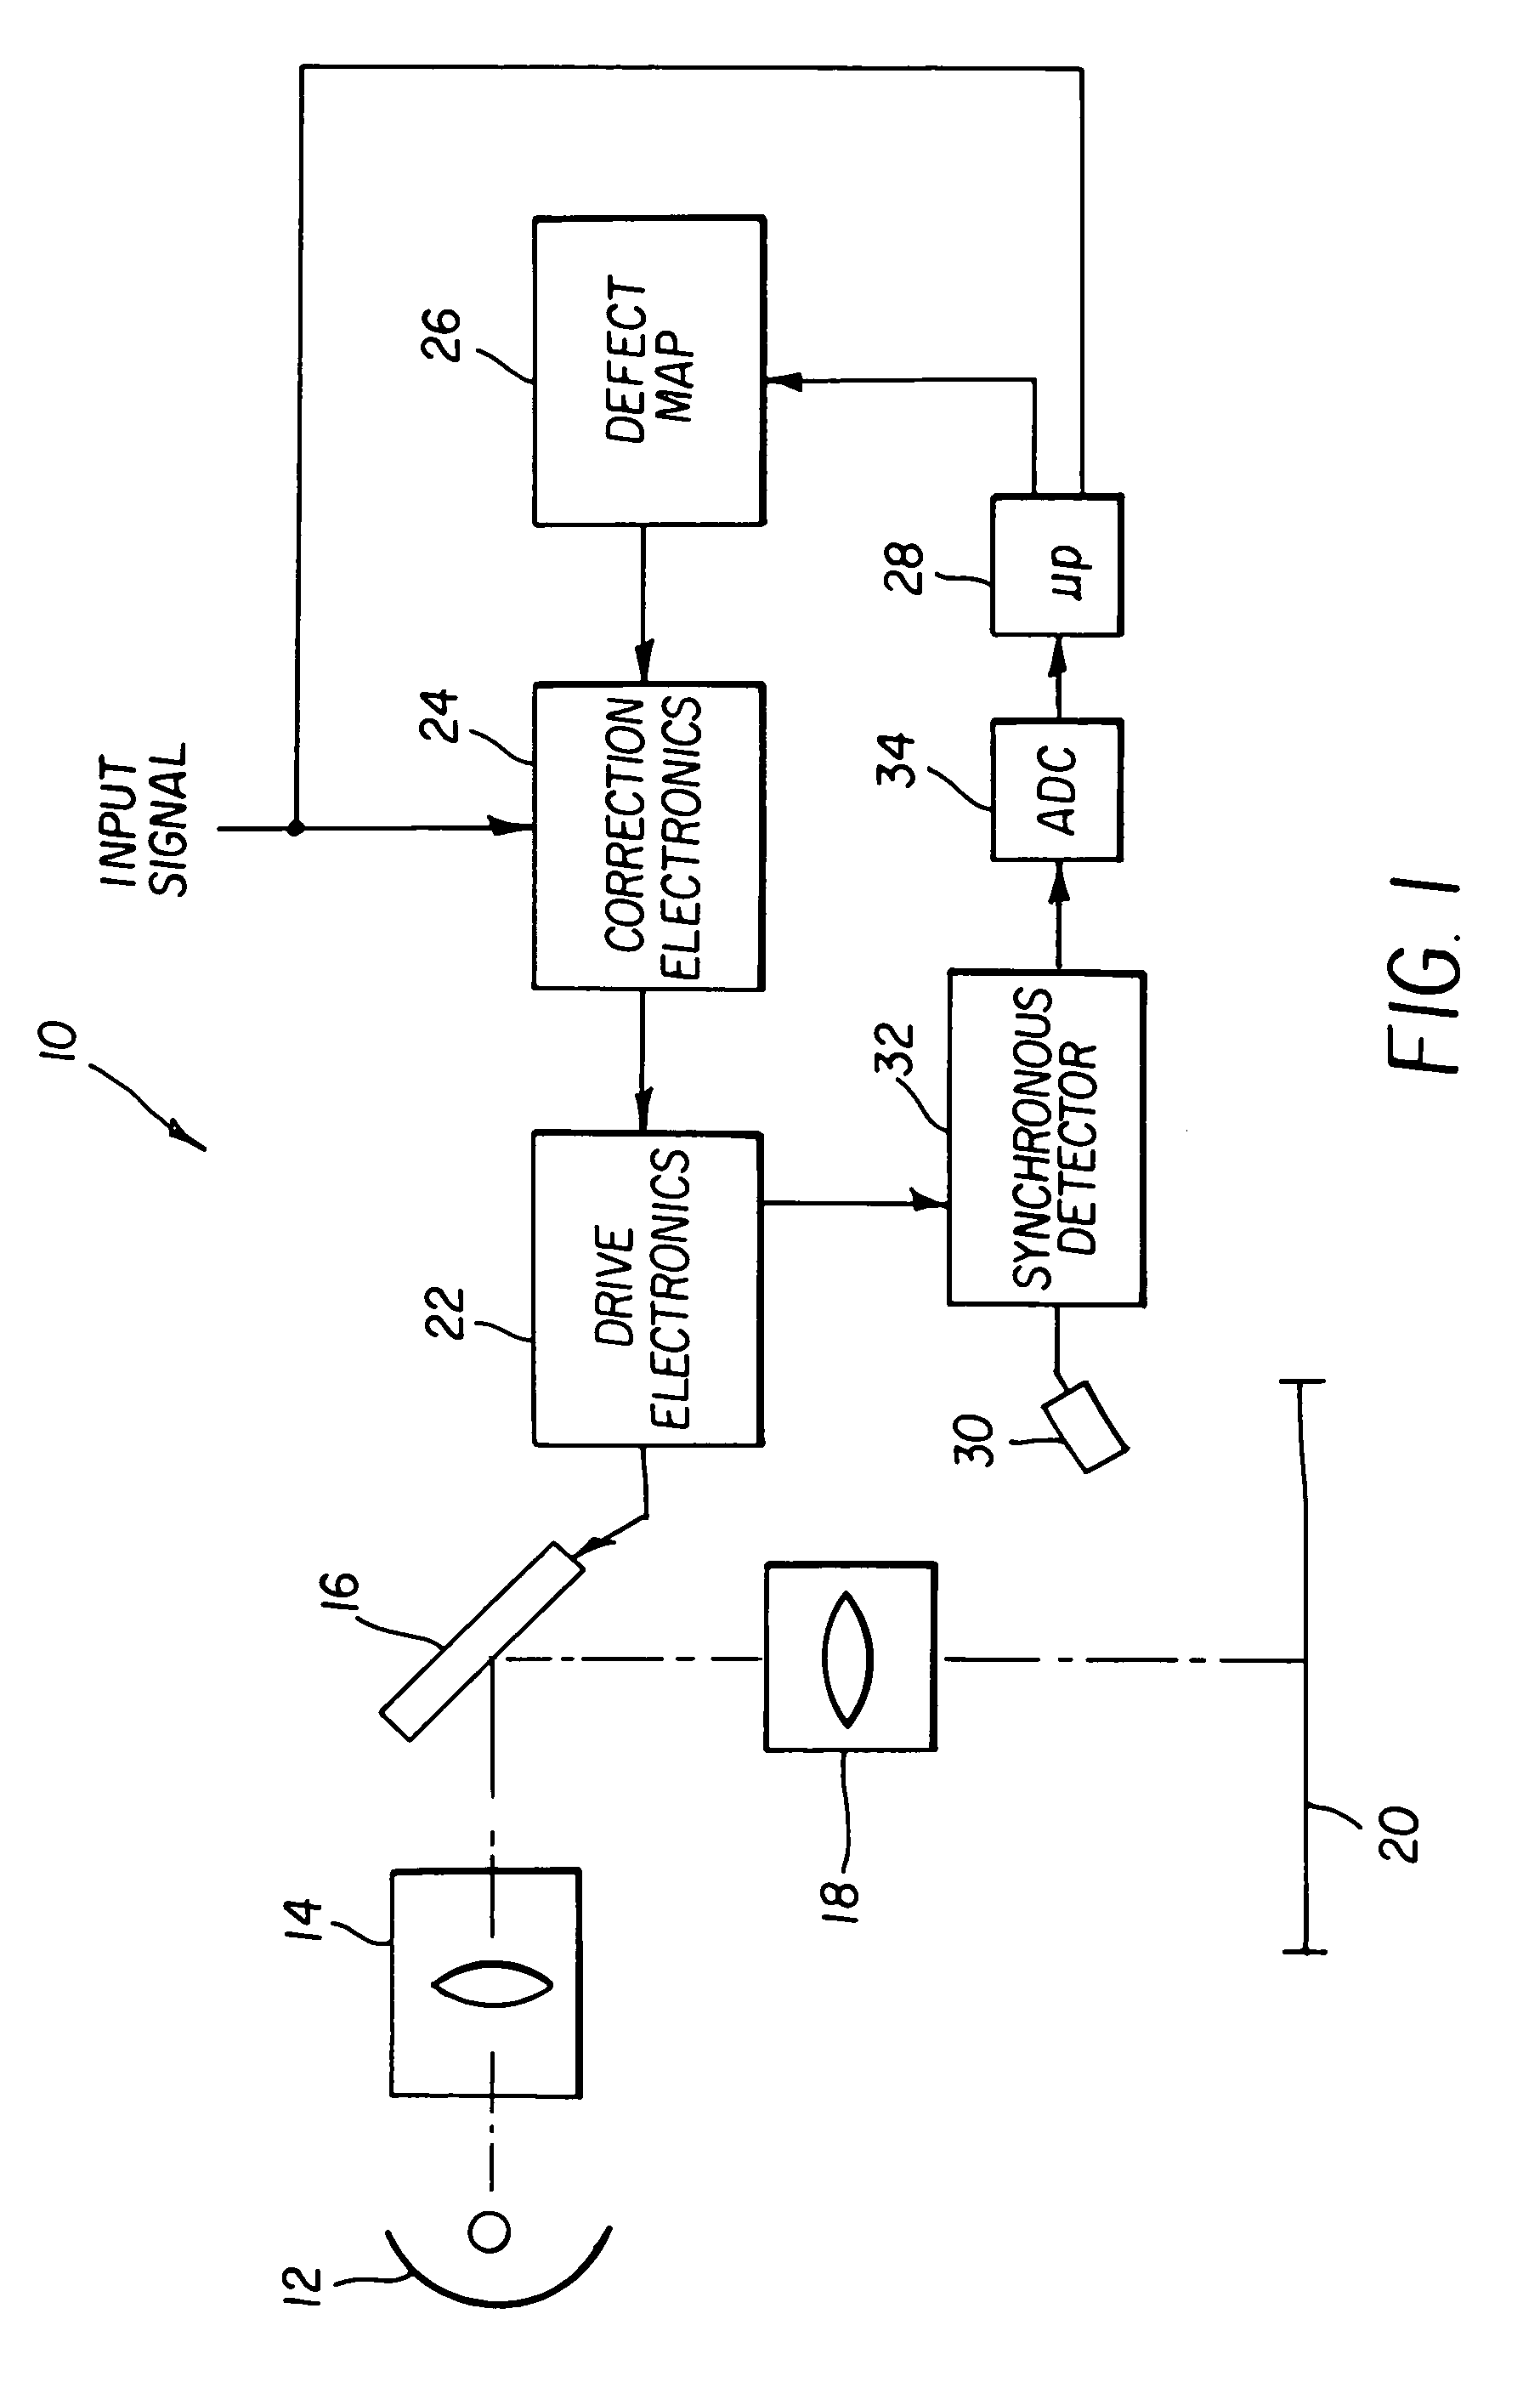 Method and apparatus for determining and correcting for illumination variations in a digital projector